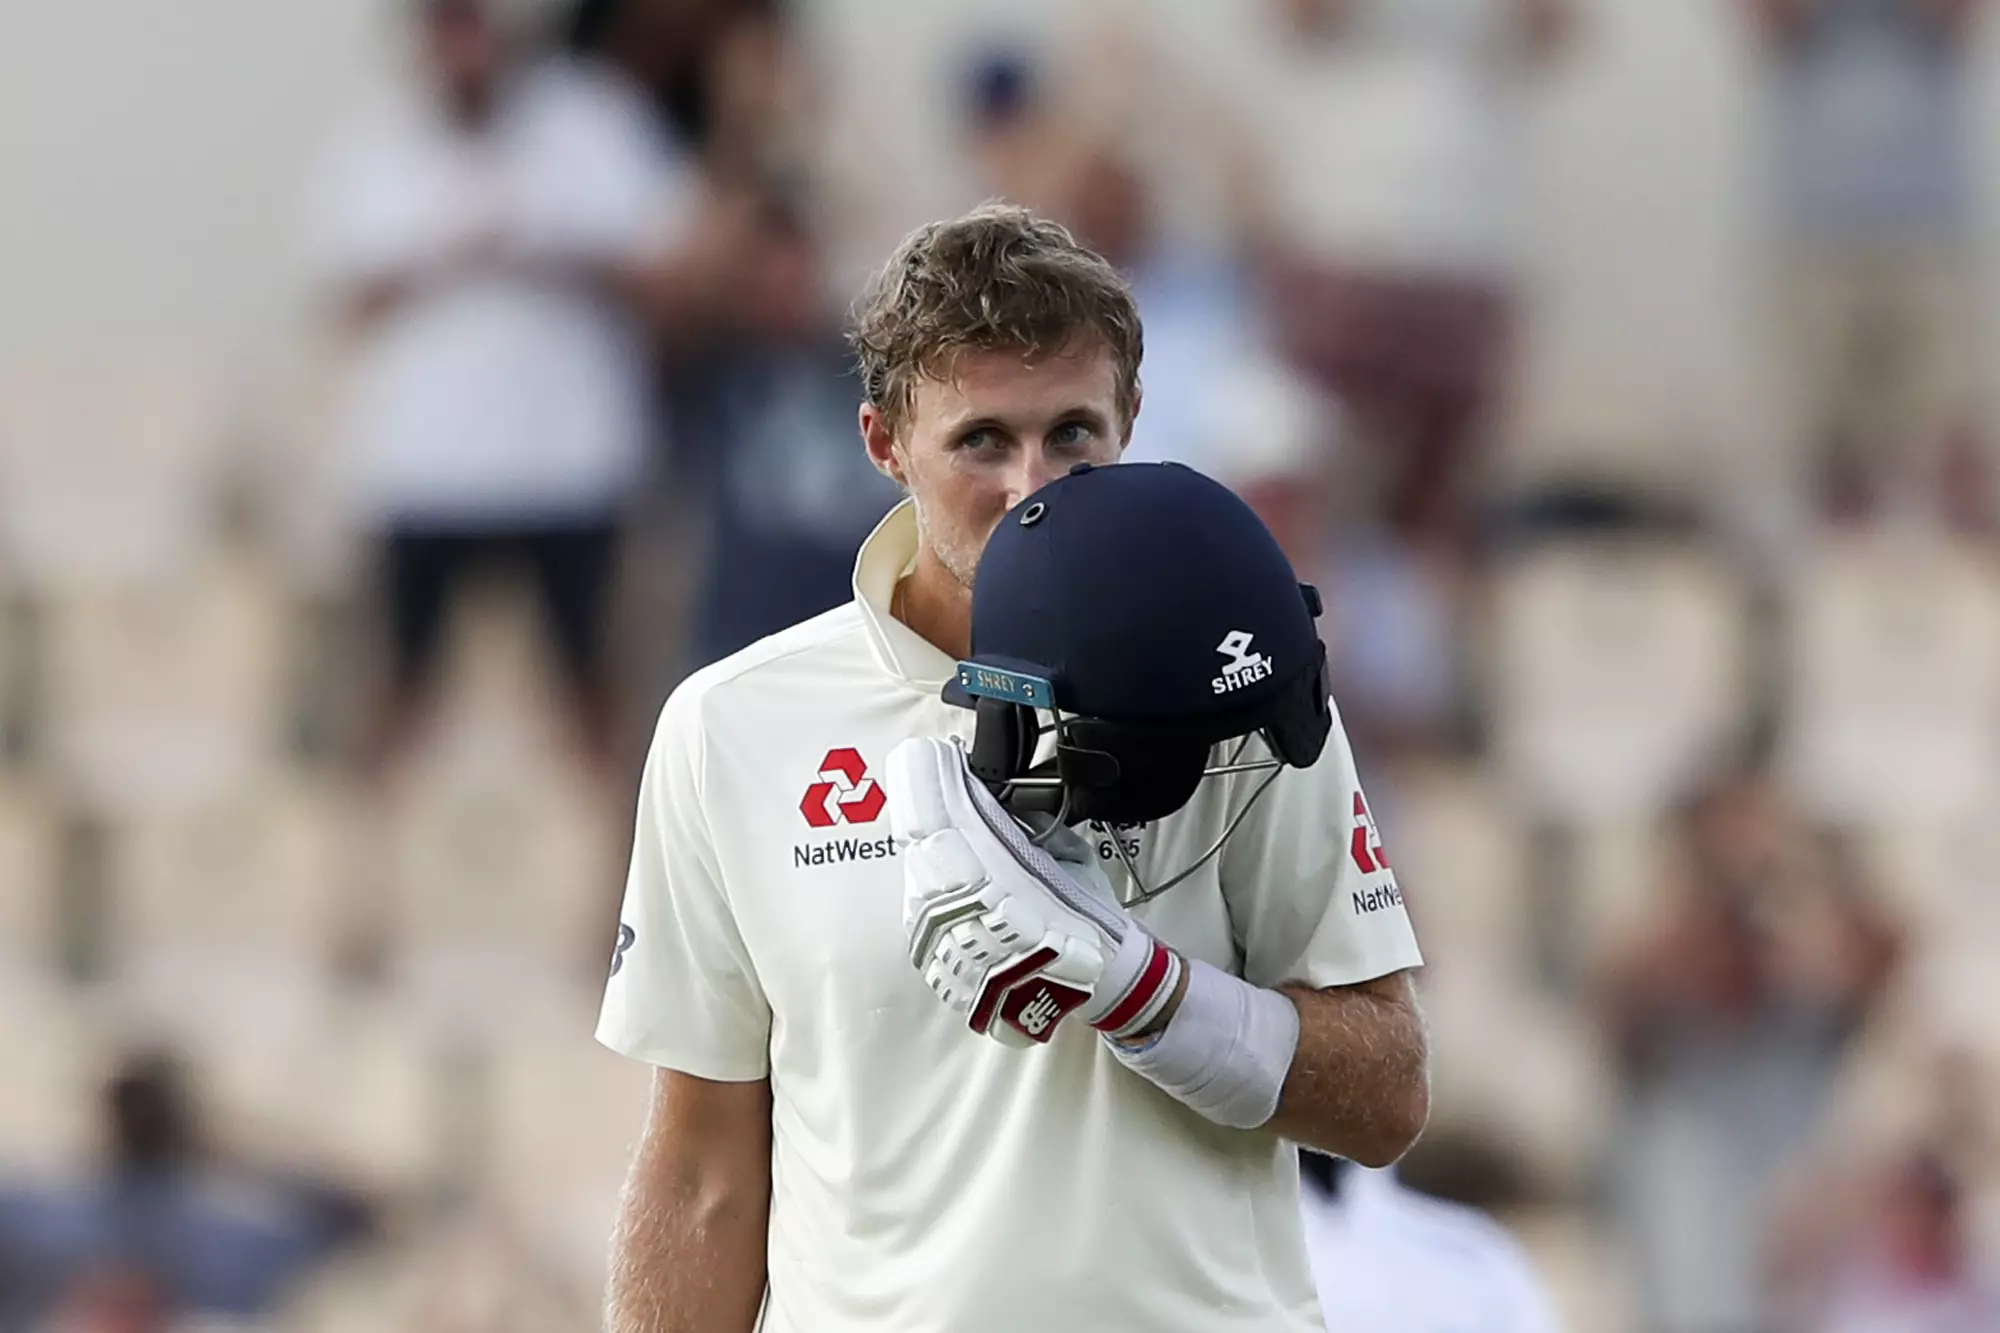 Root told the West Indies bowler that being gay wasn't an insult.